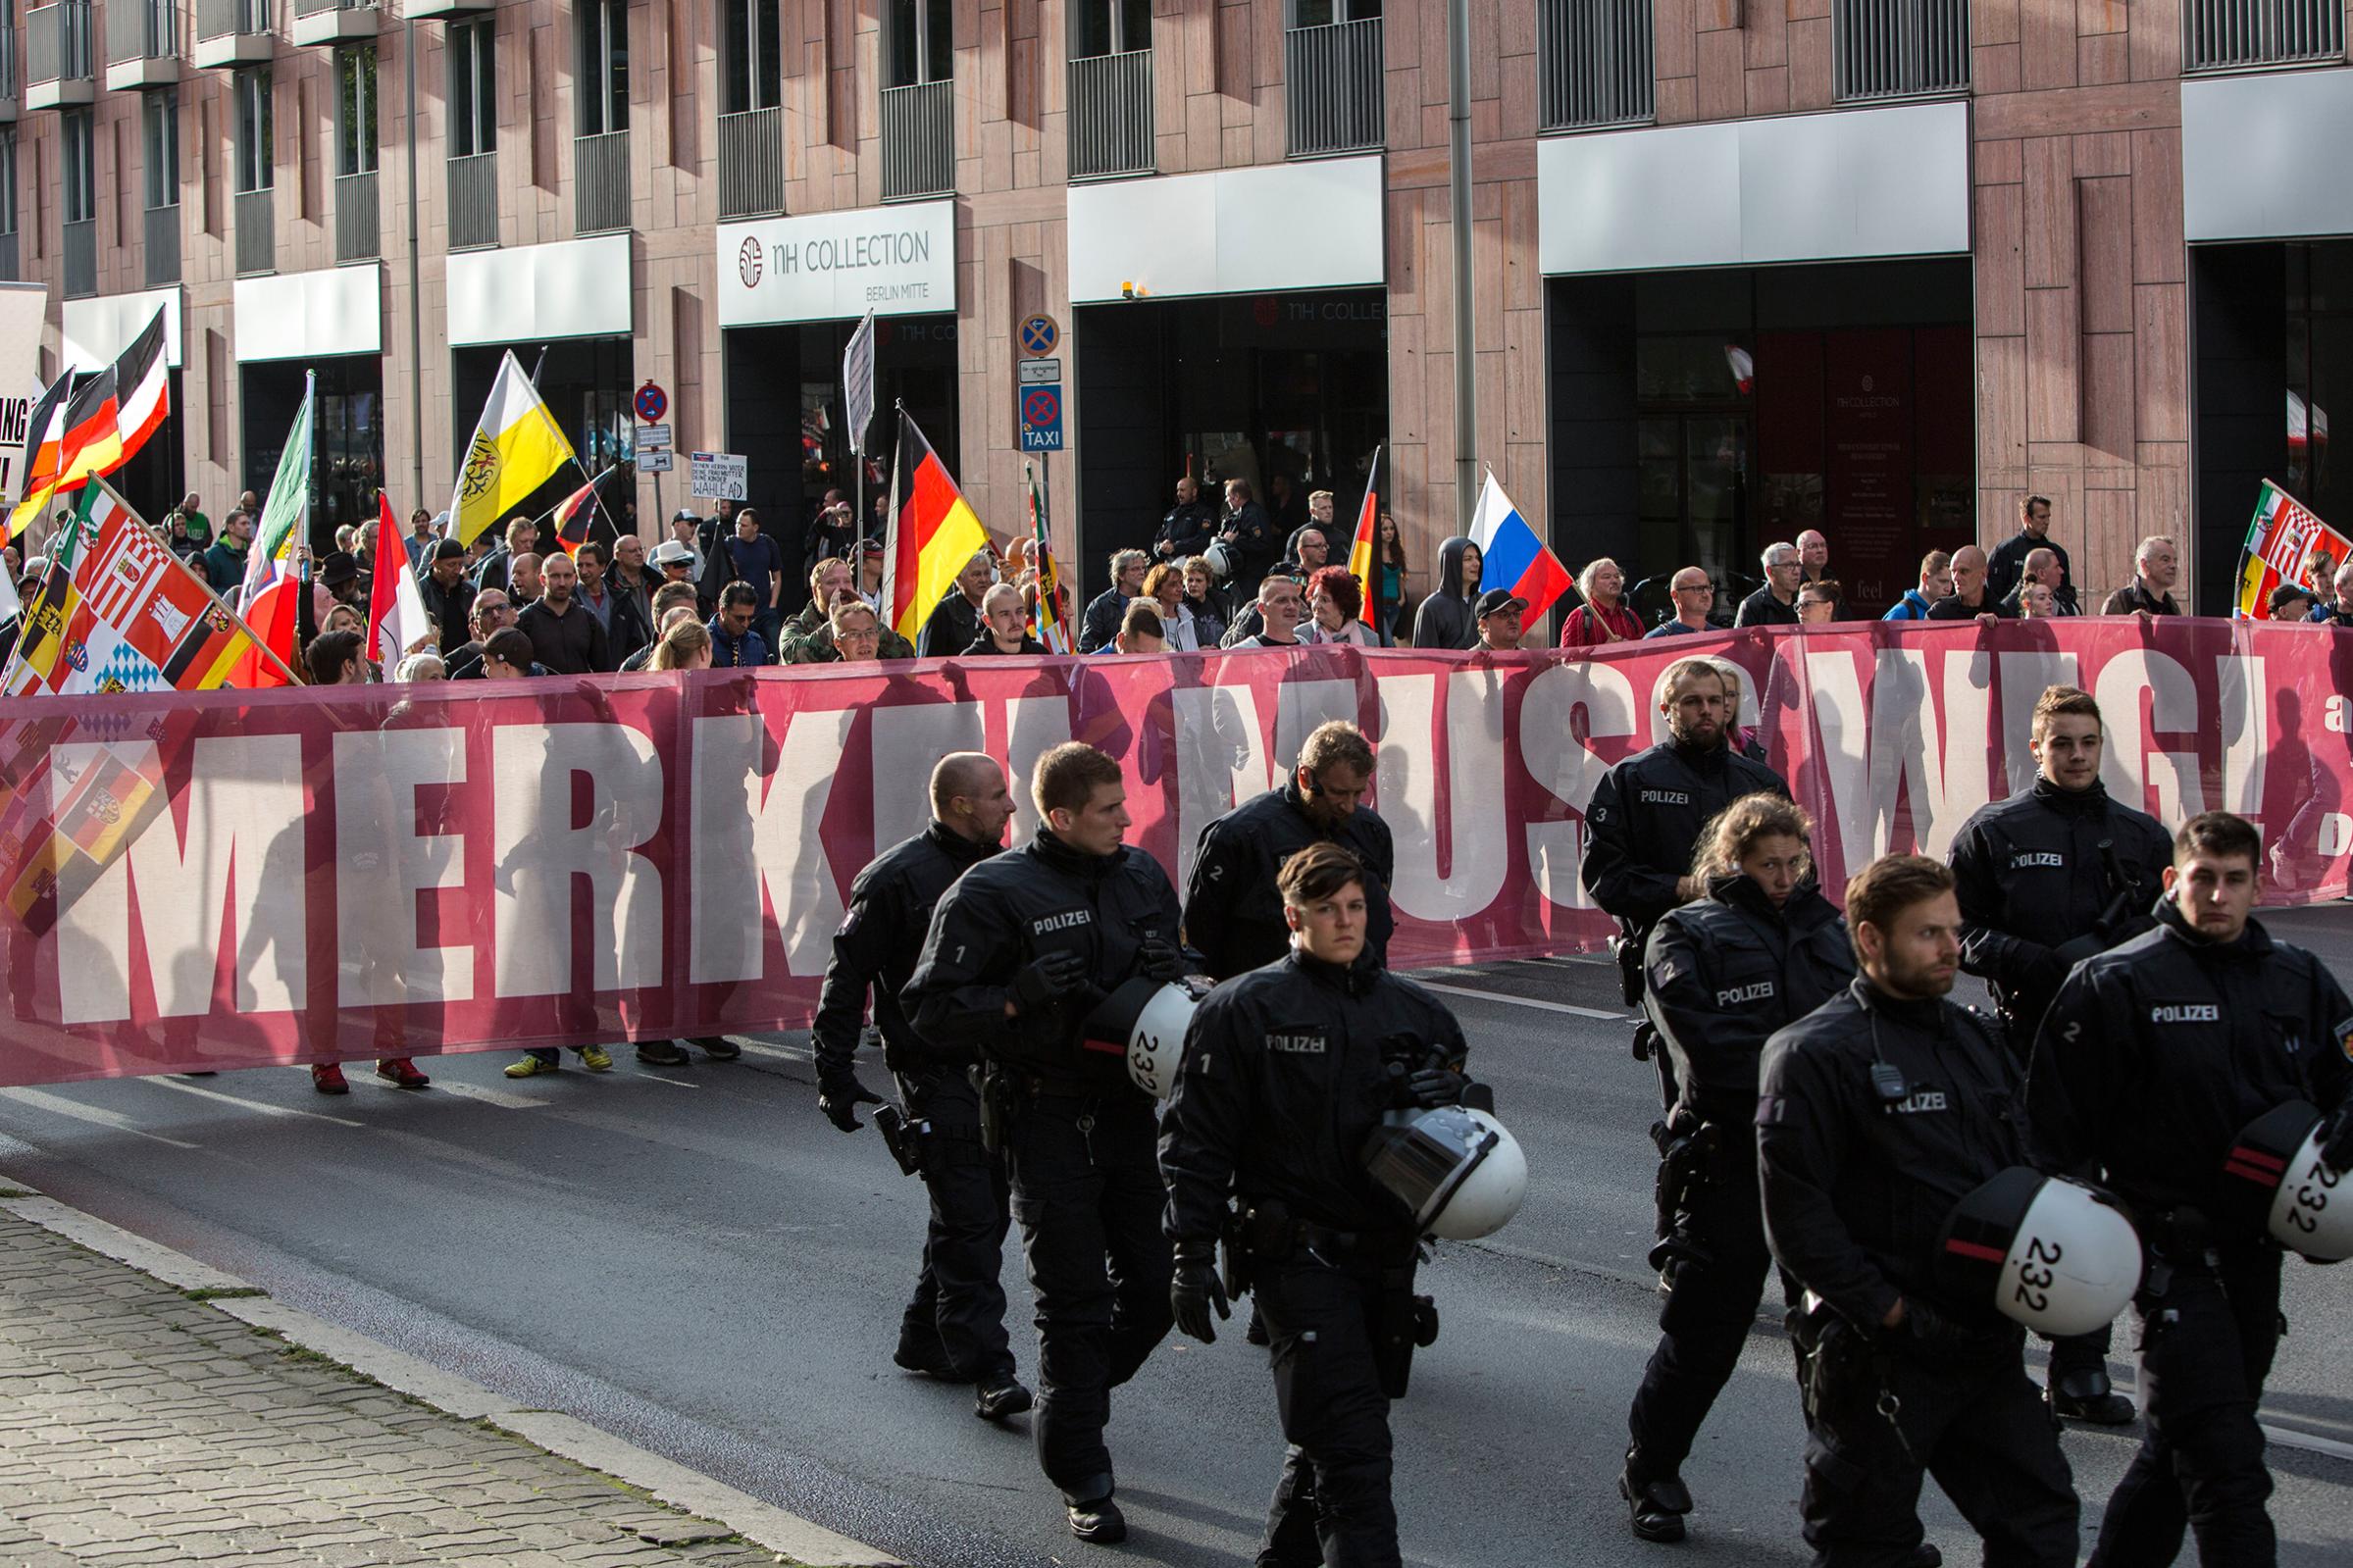 About 400 participants marched through Berlin's Mitte district as part of the seventh (and last) demonstration under the title "Merkel Muss Weg" (Merkel must go), on Sept. 9, 2017.